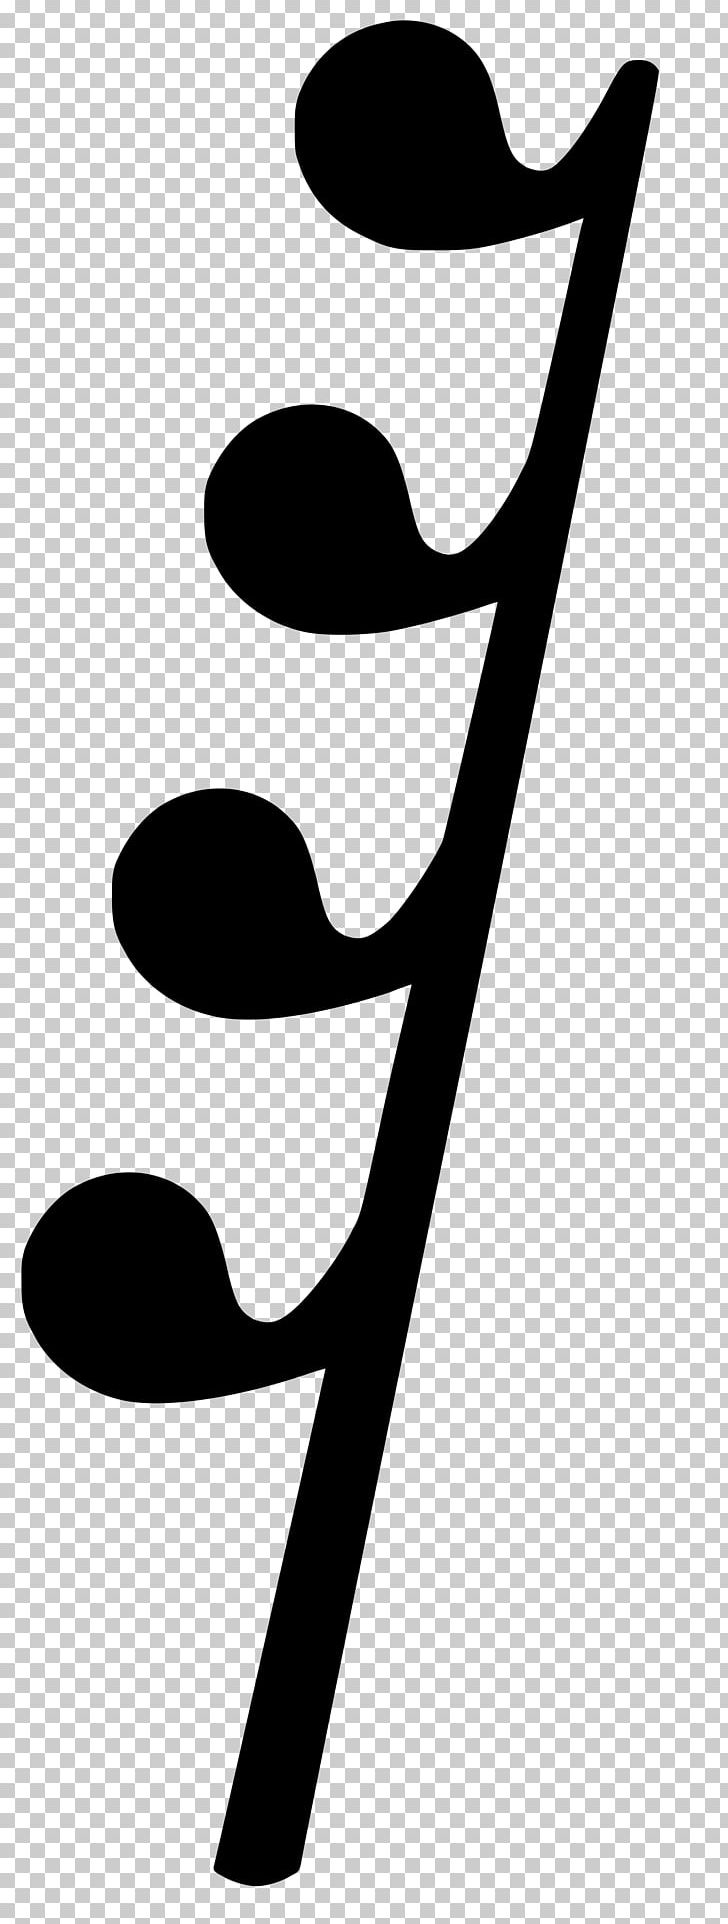 Rest Musical Note Sixty-fourth Note Musical Notation PNG, Clipart, Art, Black, Branch, Eighth Note, Free Music Free PNG Download